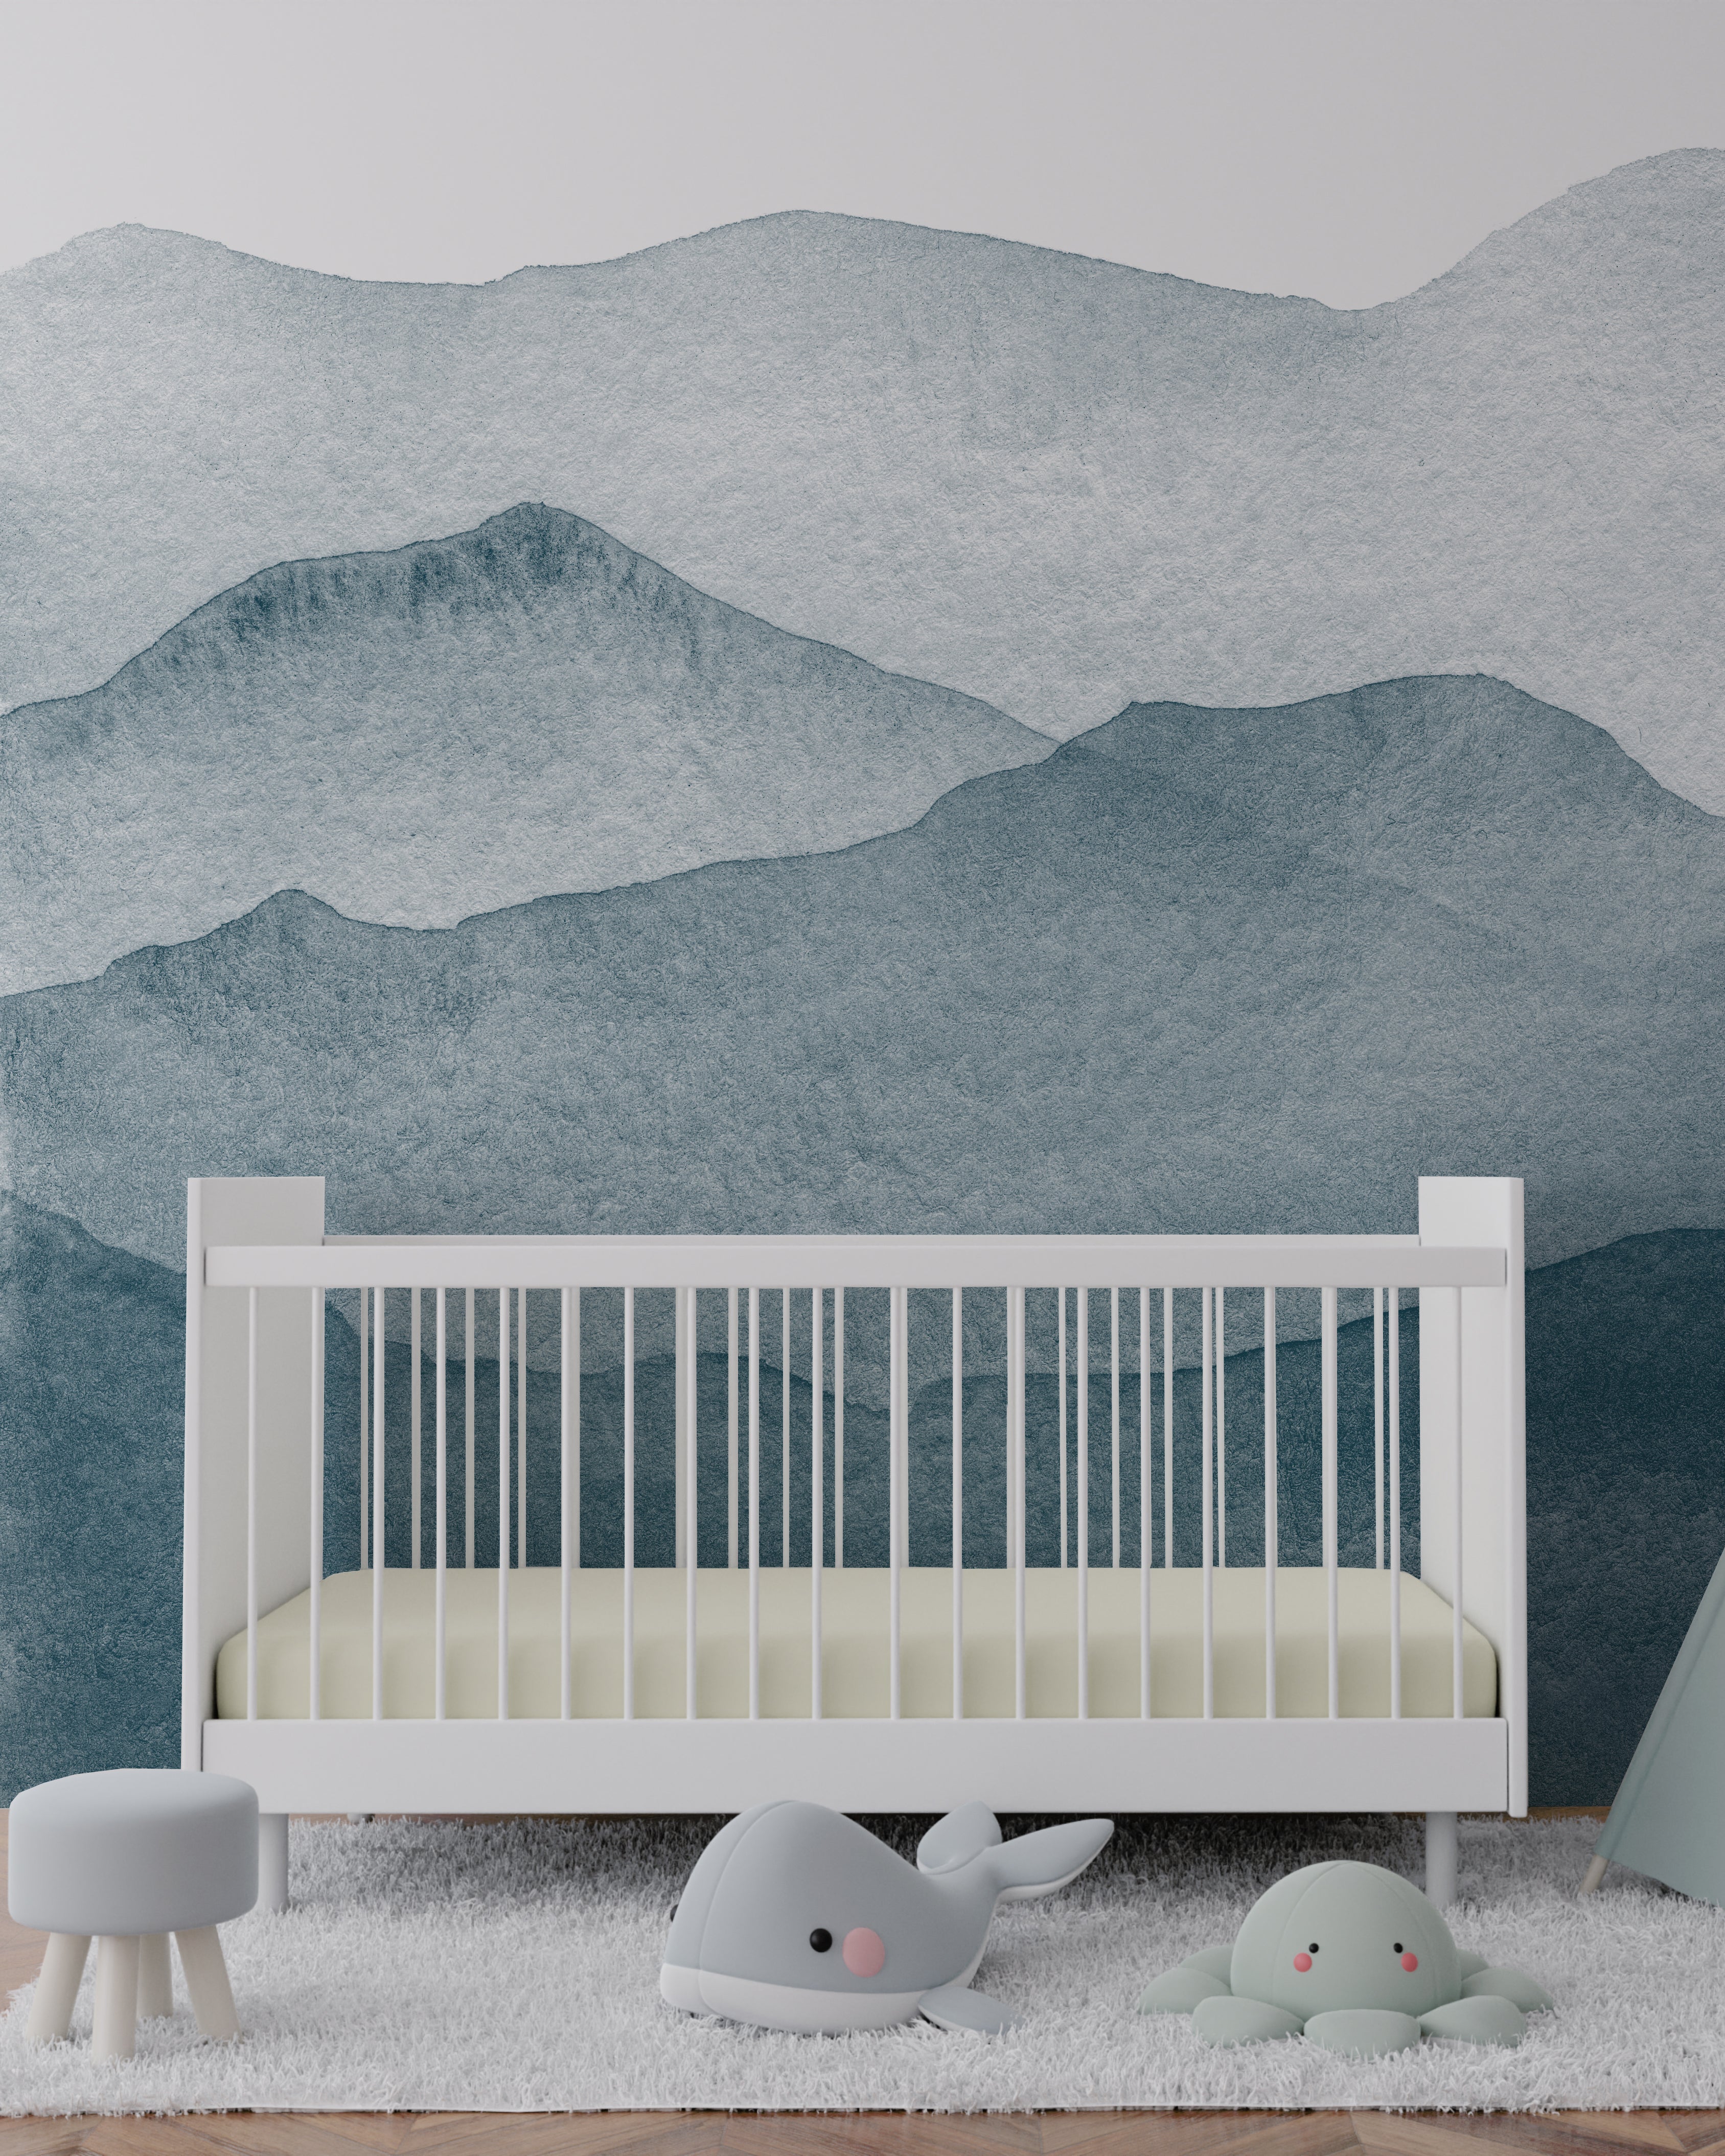 A serene nursery room featuring the Watercolour Mountains Wallpaper Mural, depicting soft watercolor mountains in shades of blue. The mural creates a tranquil backdrop behind a white crib, with plush toys and a small stool, adding a whimsical touch to the soothing space